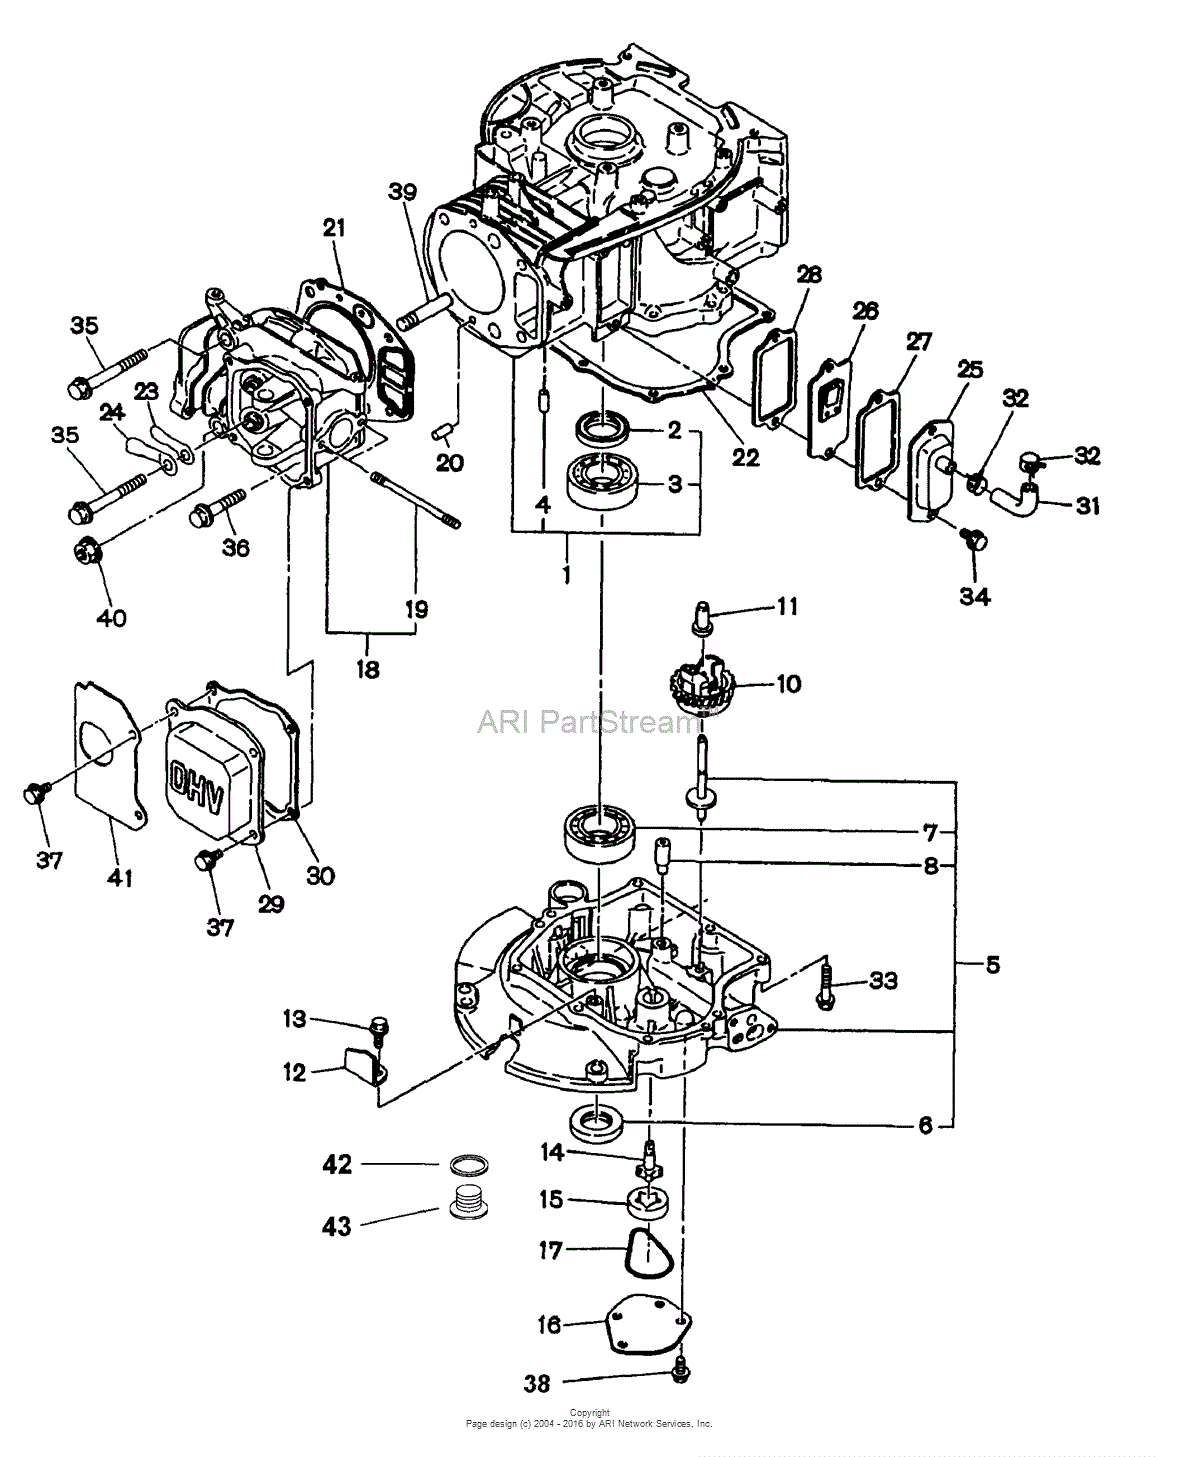 Snapper WO1180V 6.5 HP 4 Cycle OHV Robin Engine Parts Diagram for Crankcase